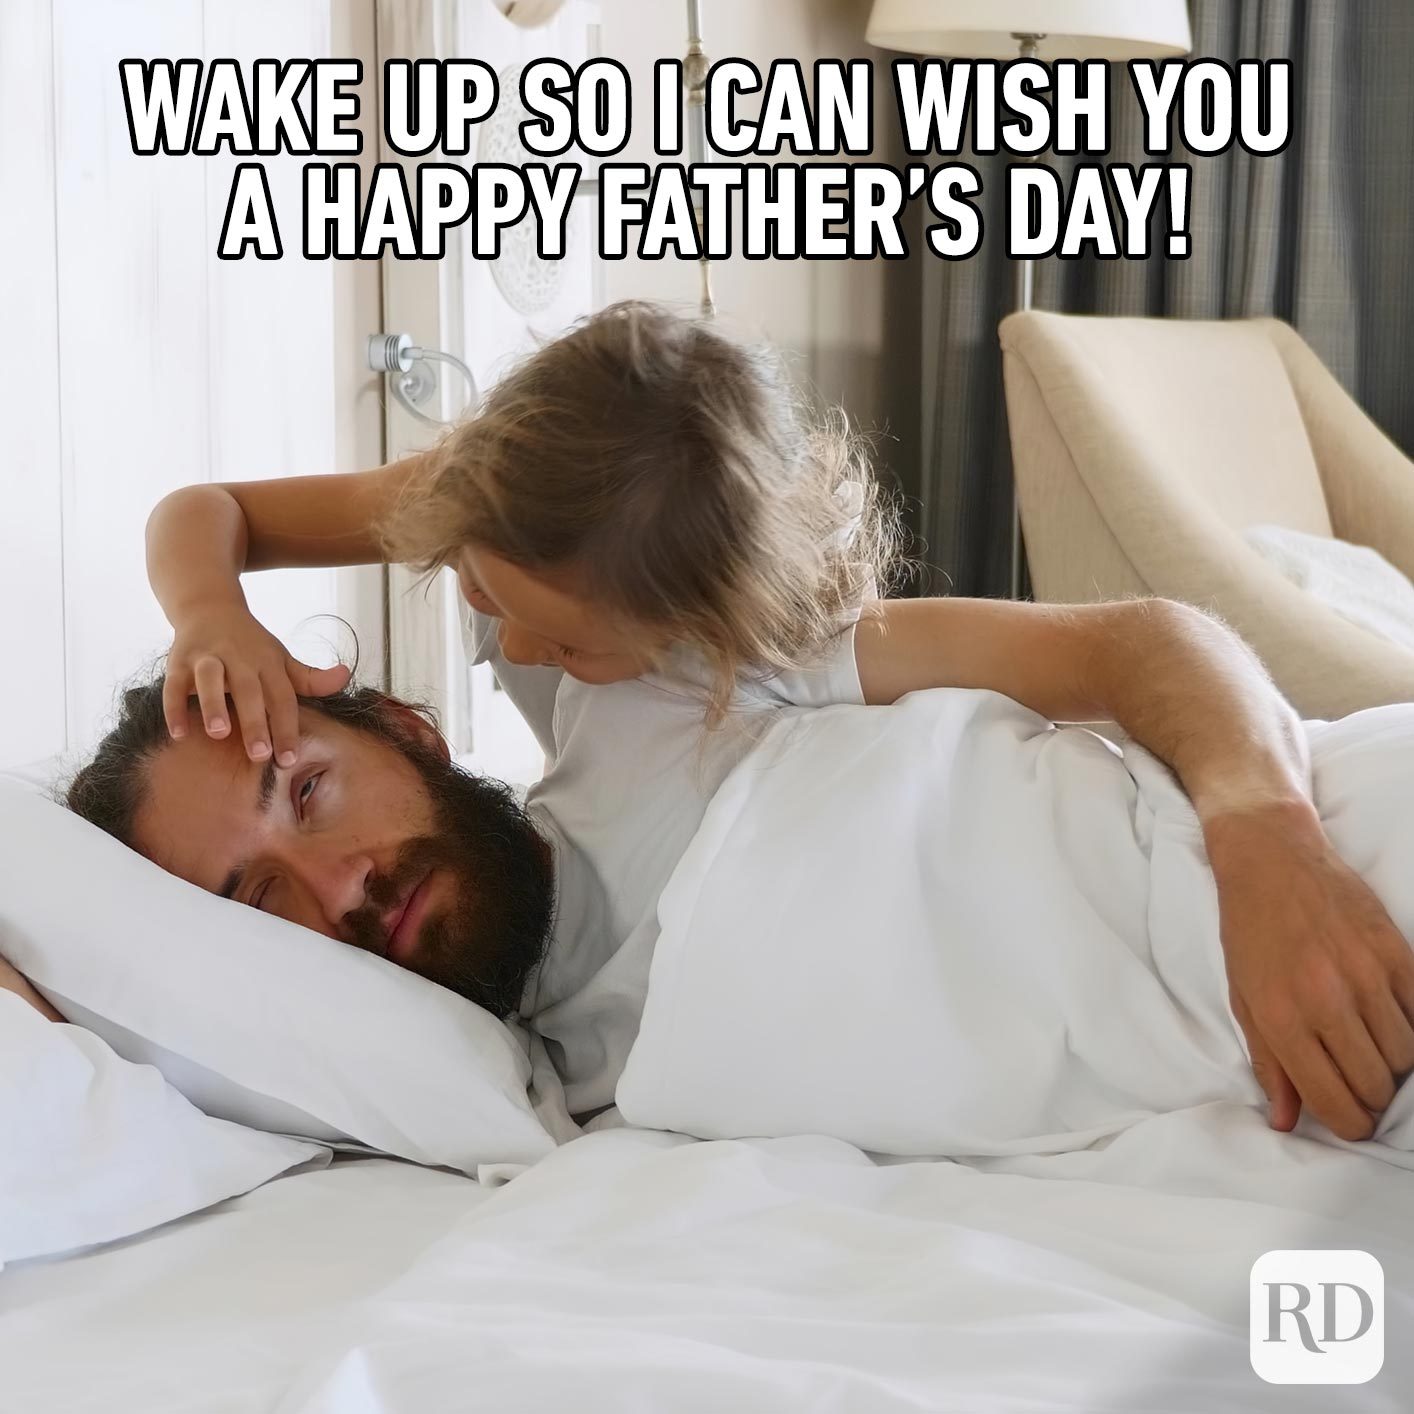 Girl trying to open her father's eye as he sleeps. Meme text: Wake up so I can wish you a Happy Father’s Day!